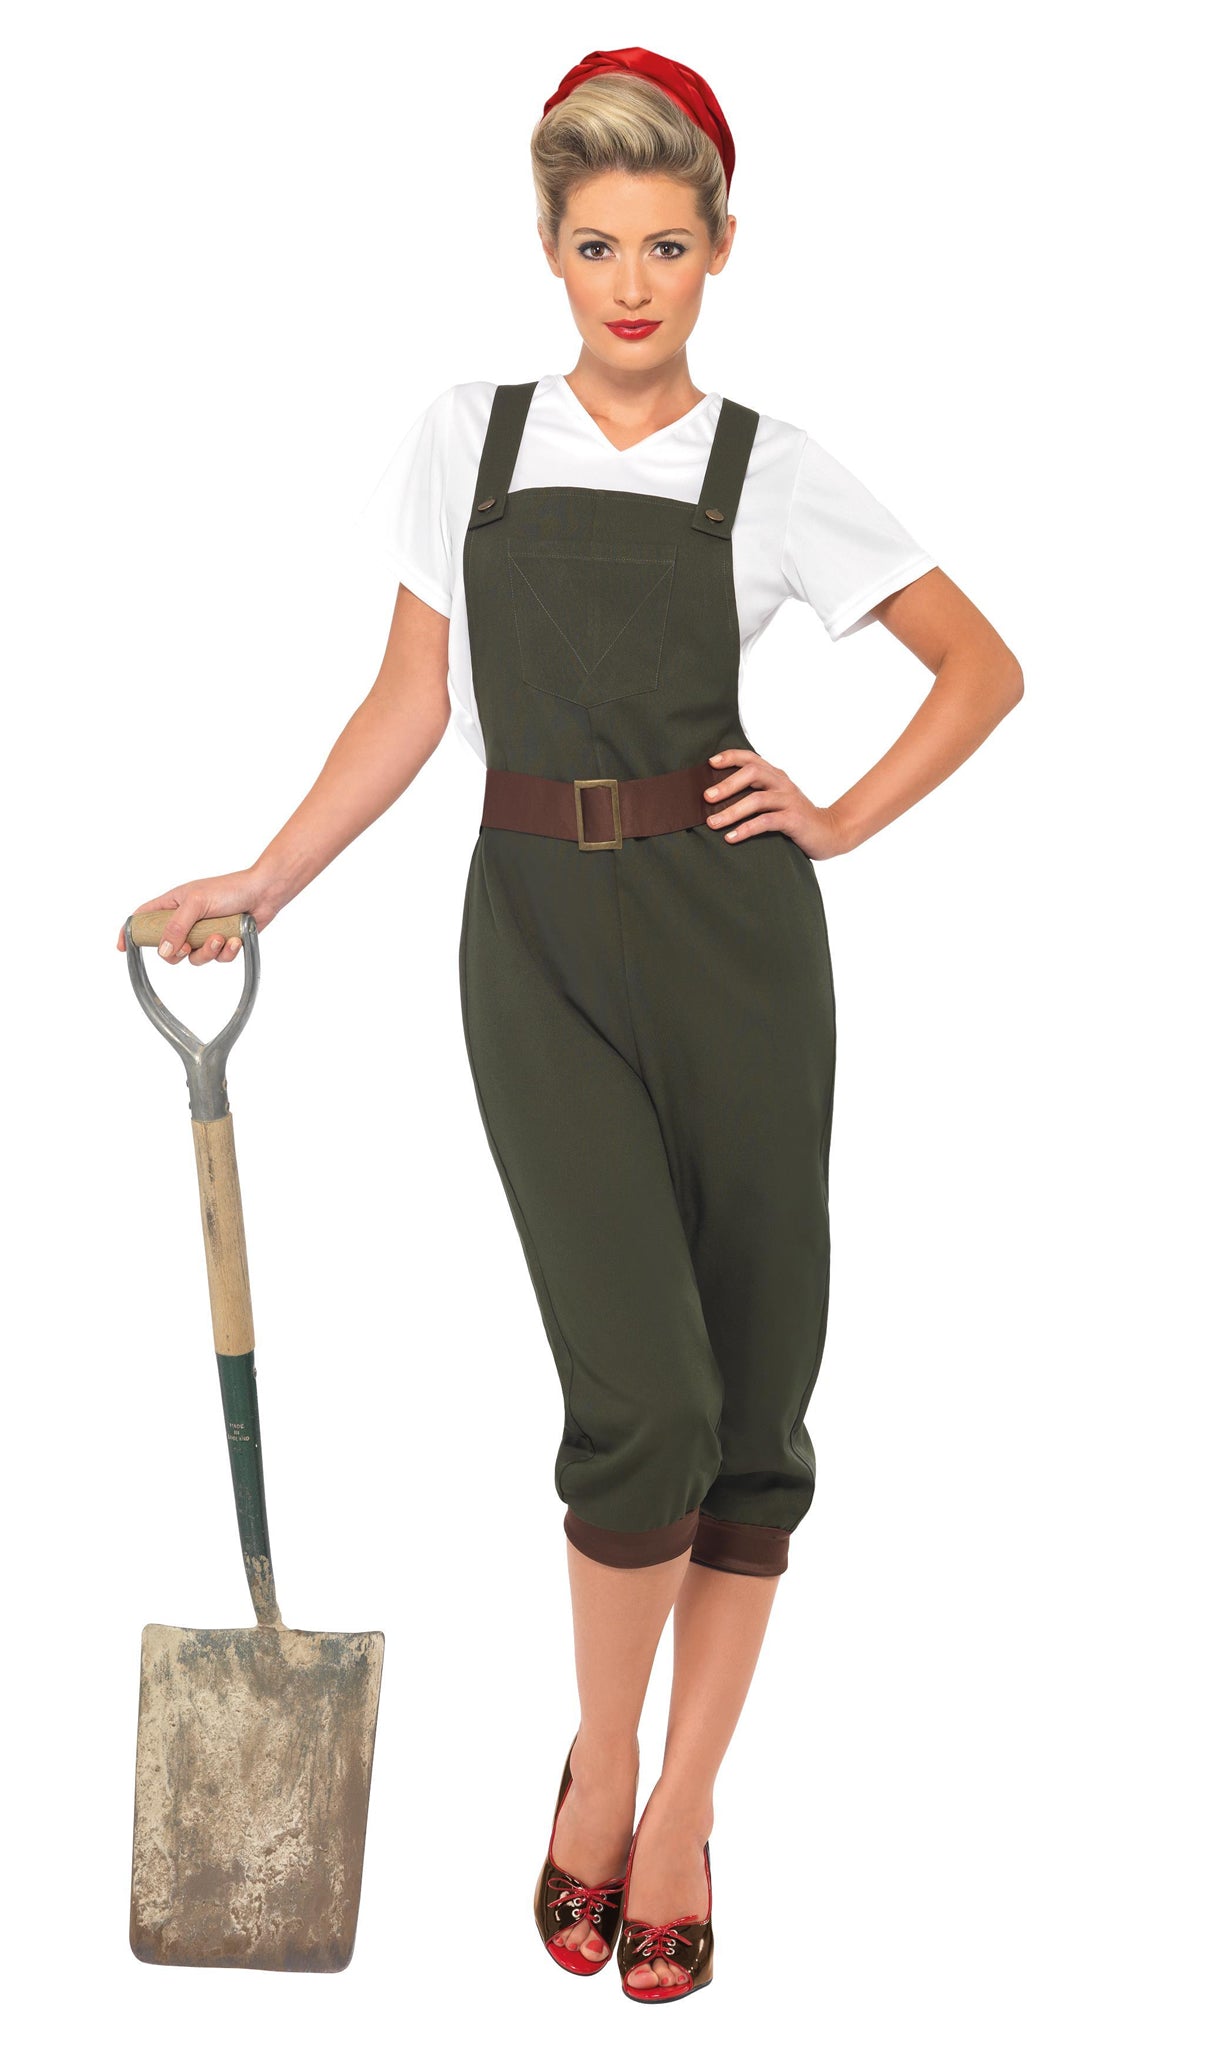 WW2 era landgirl costume in green dungarees, white top and red head scarf